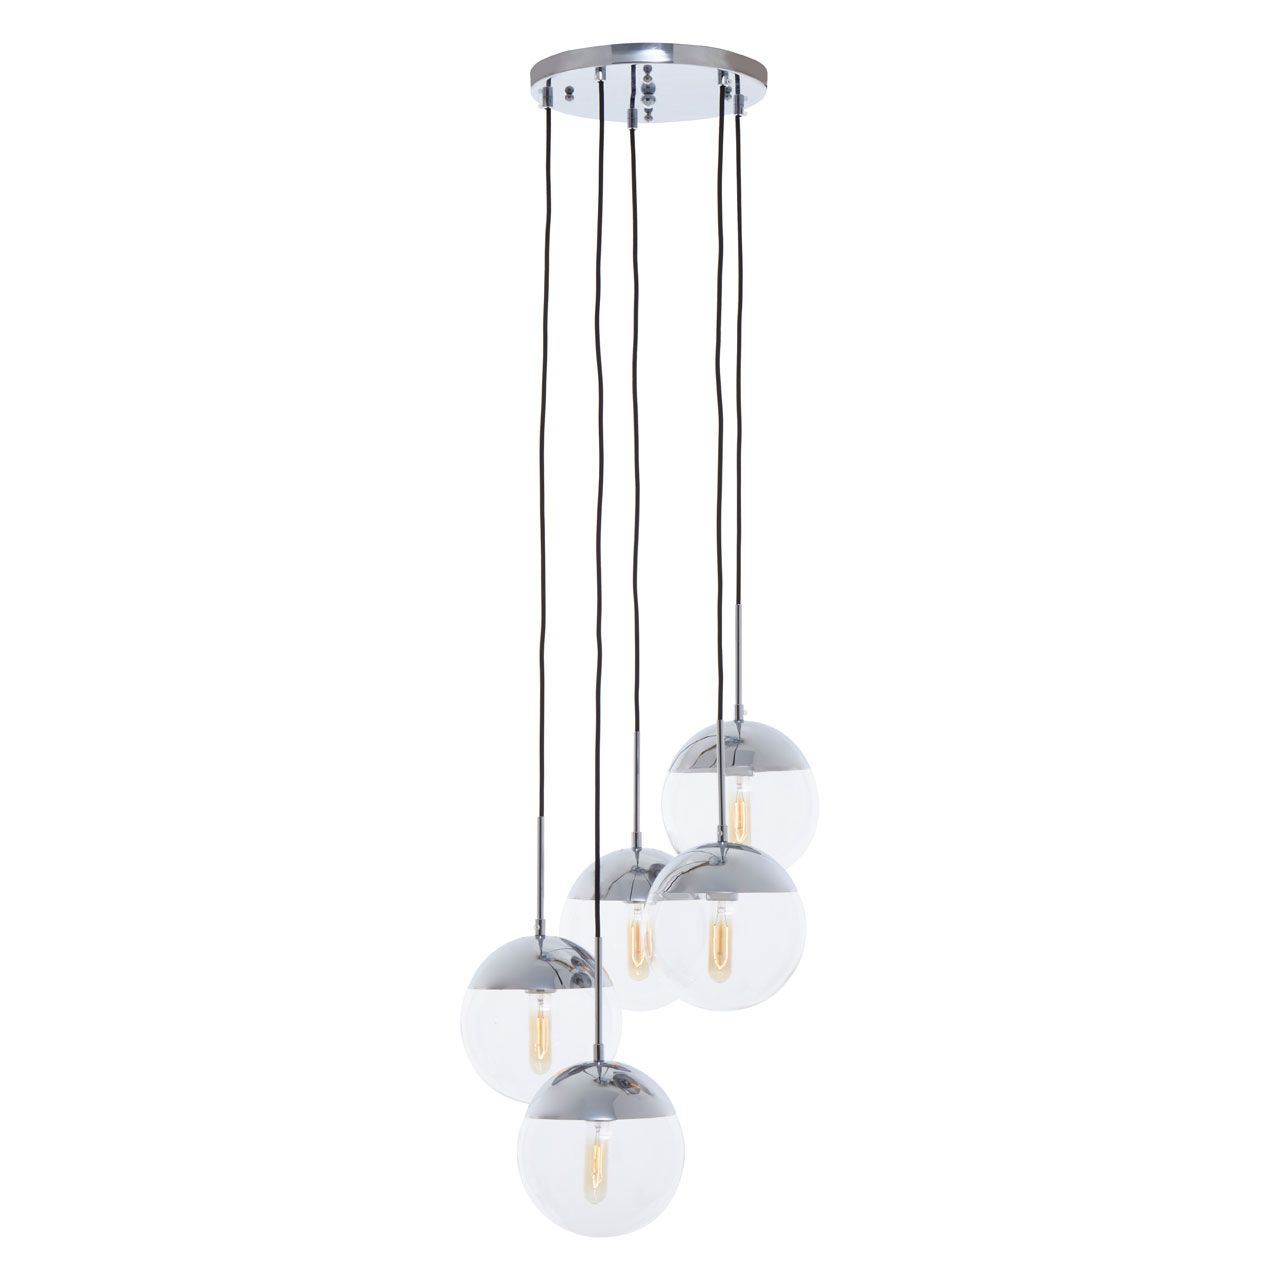 Revive Round 5 Clear Glass Shade Ceiling Pendant Light In Chrome